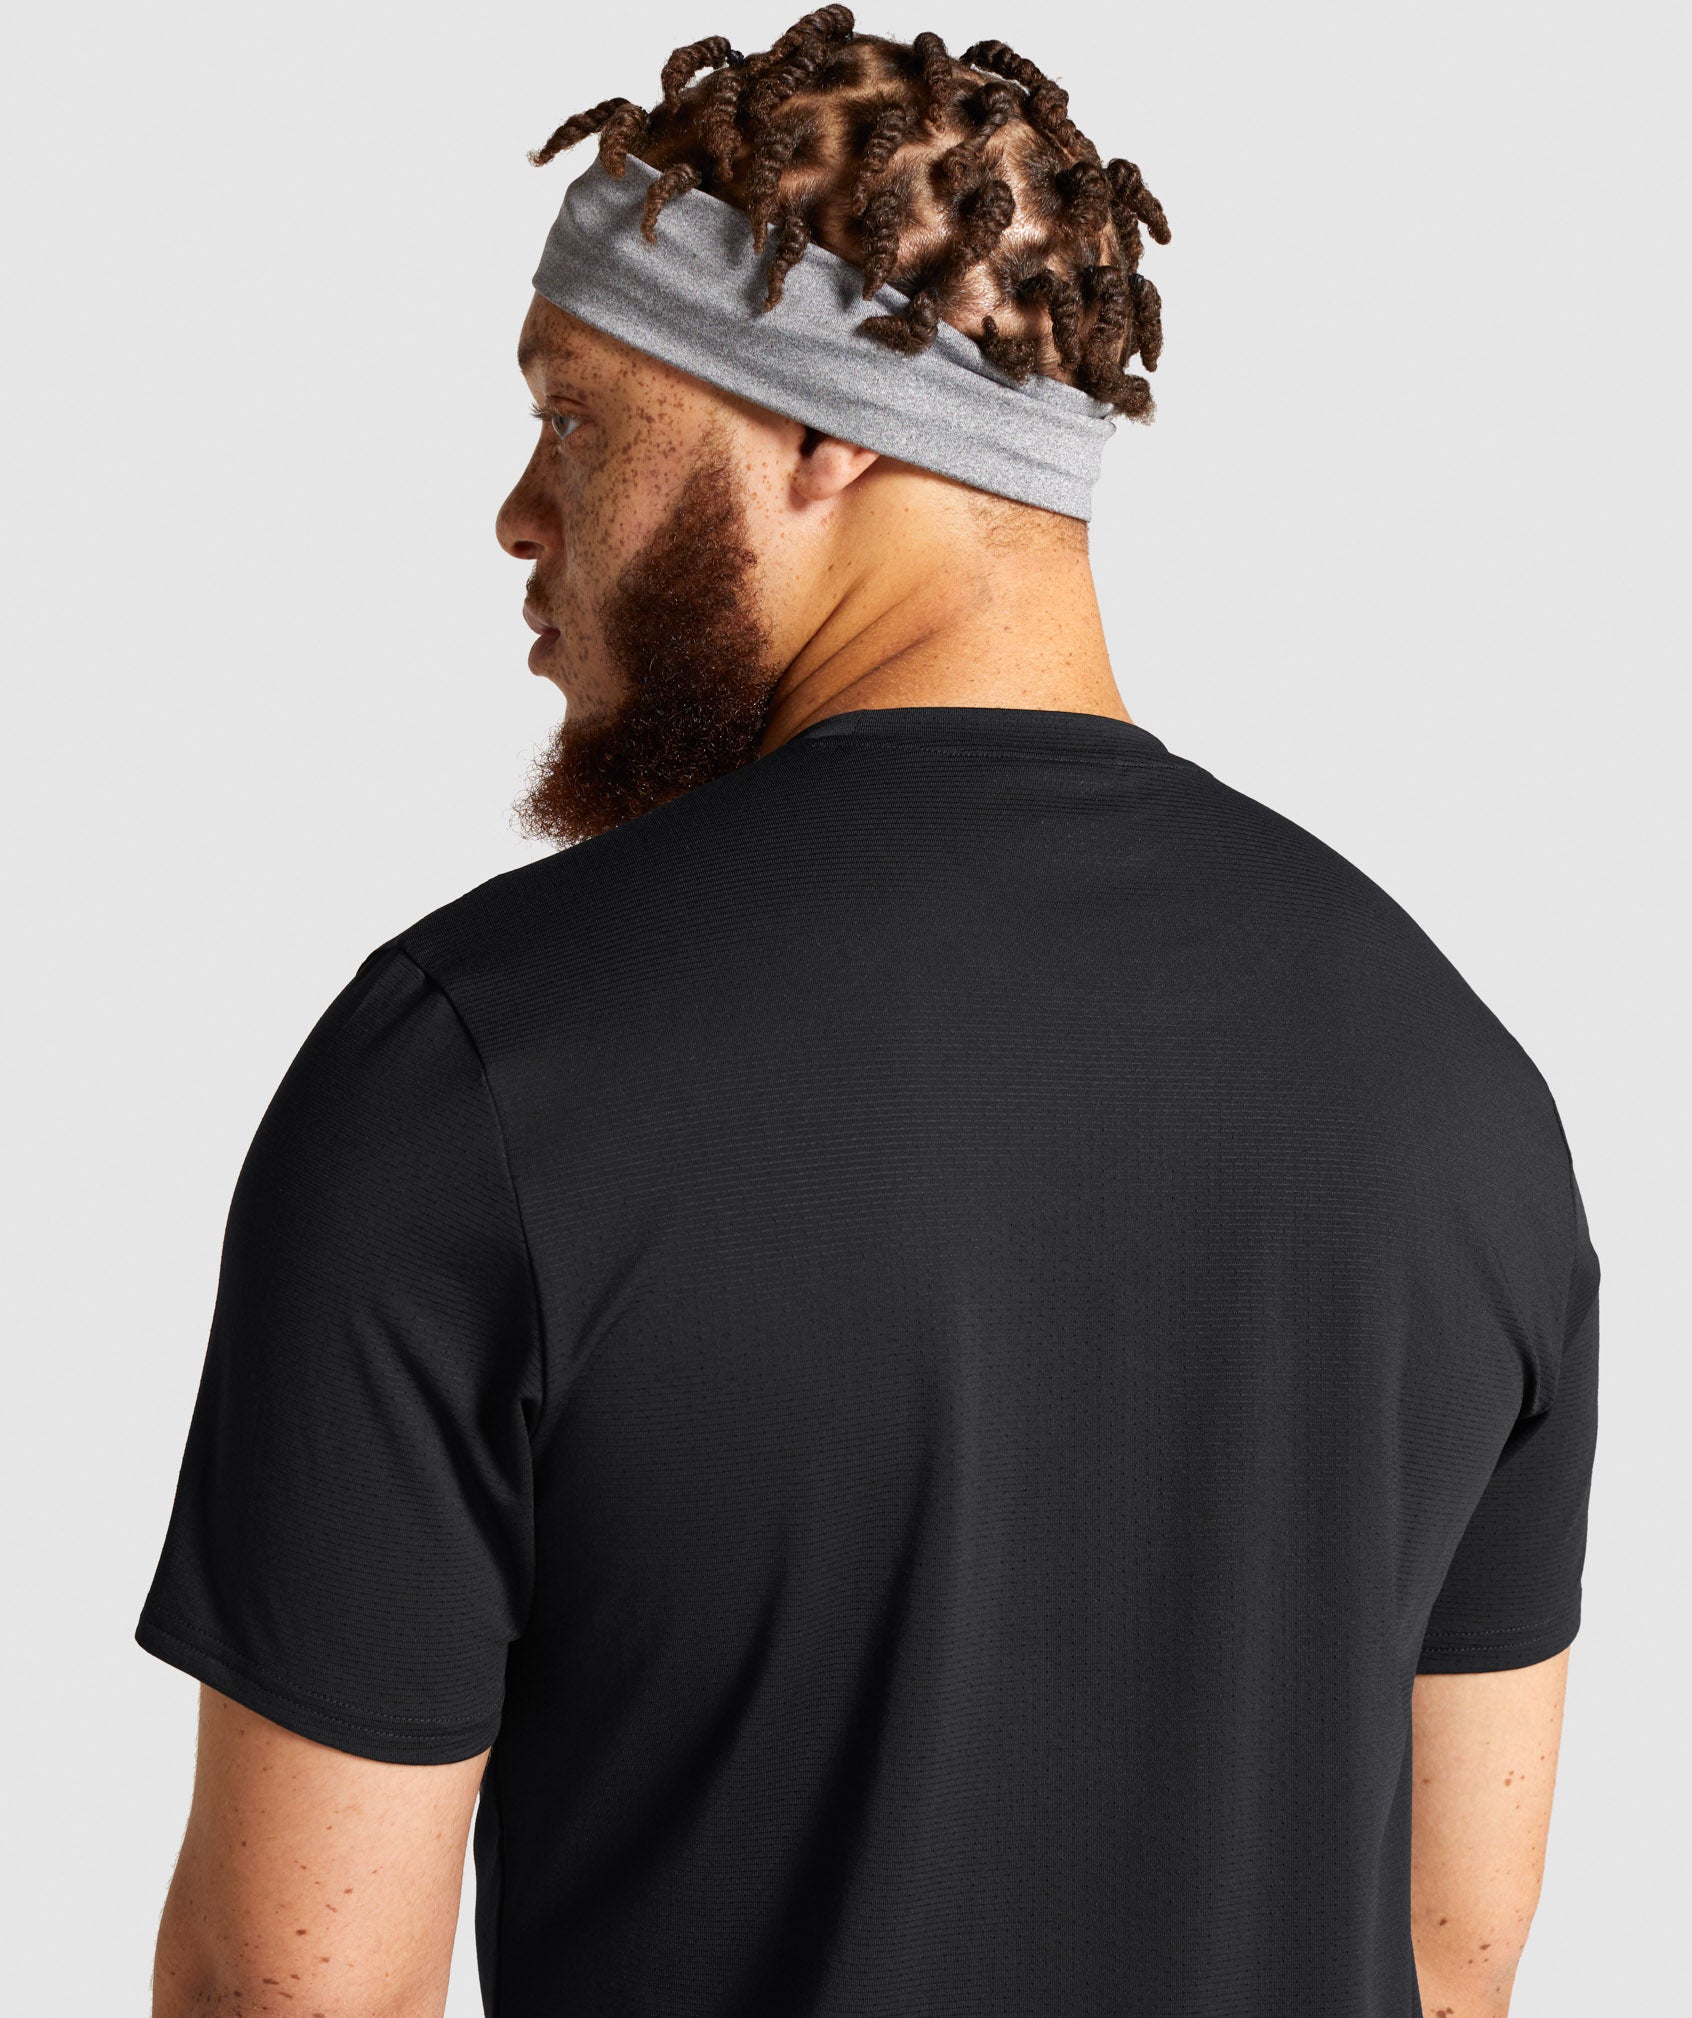 Arrival T-Shirt in Black - view 7